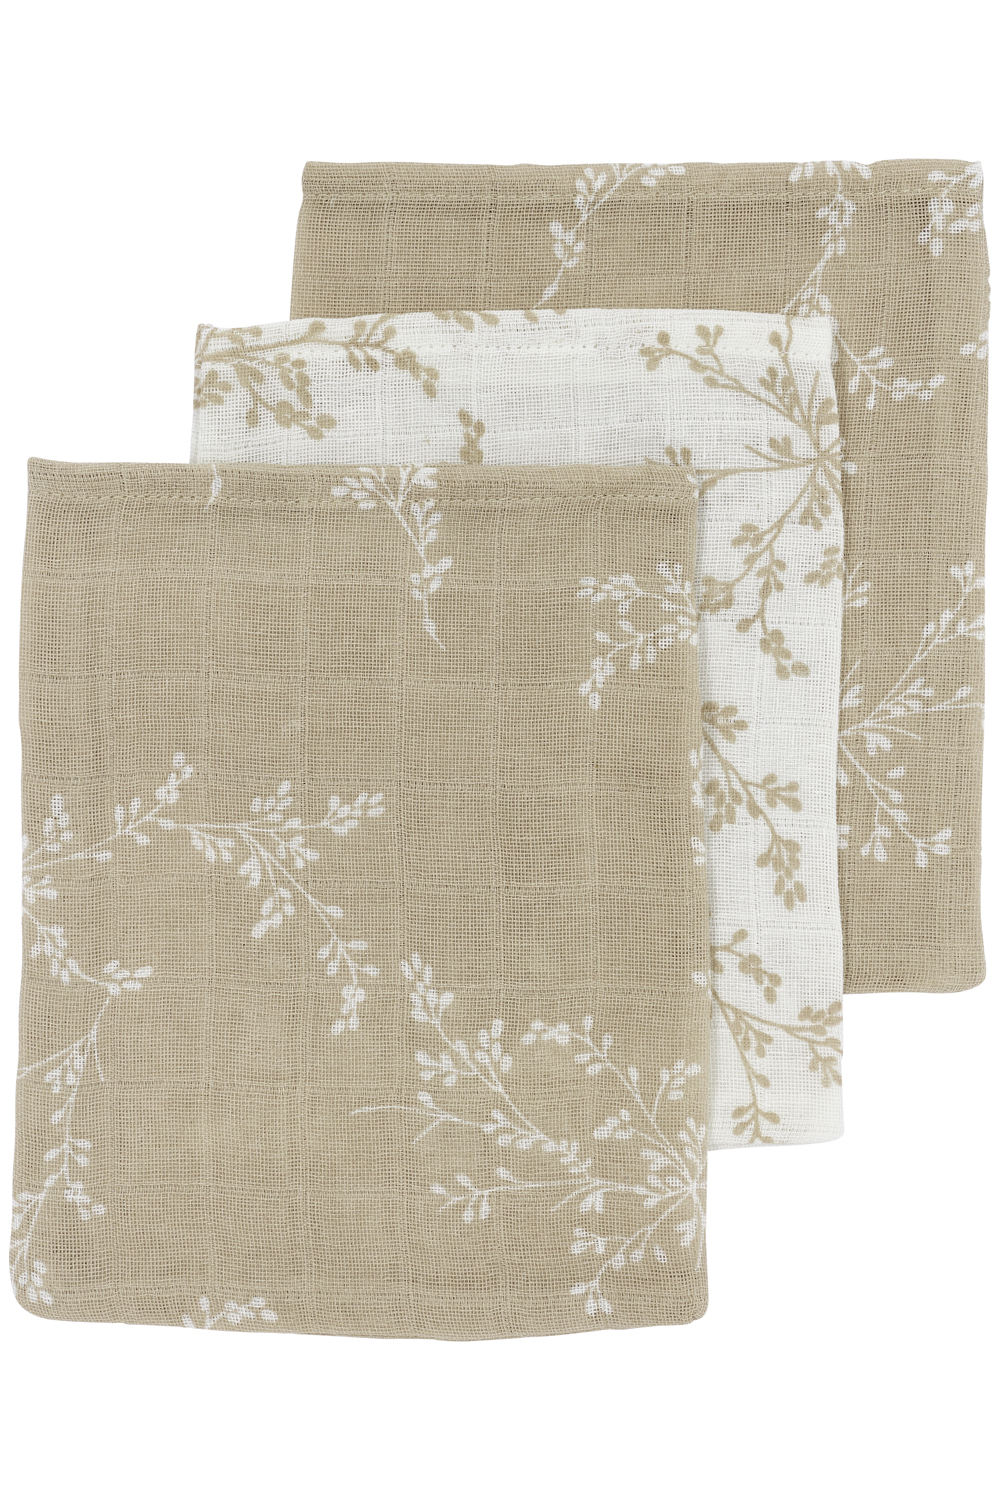 Muslin Wash Mitts 3-pack Branches - Sand - 20x17cm